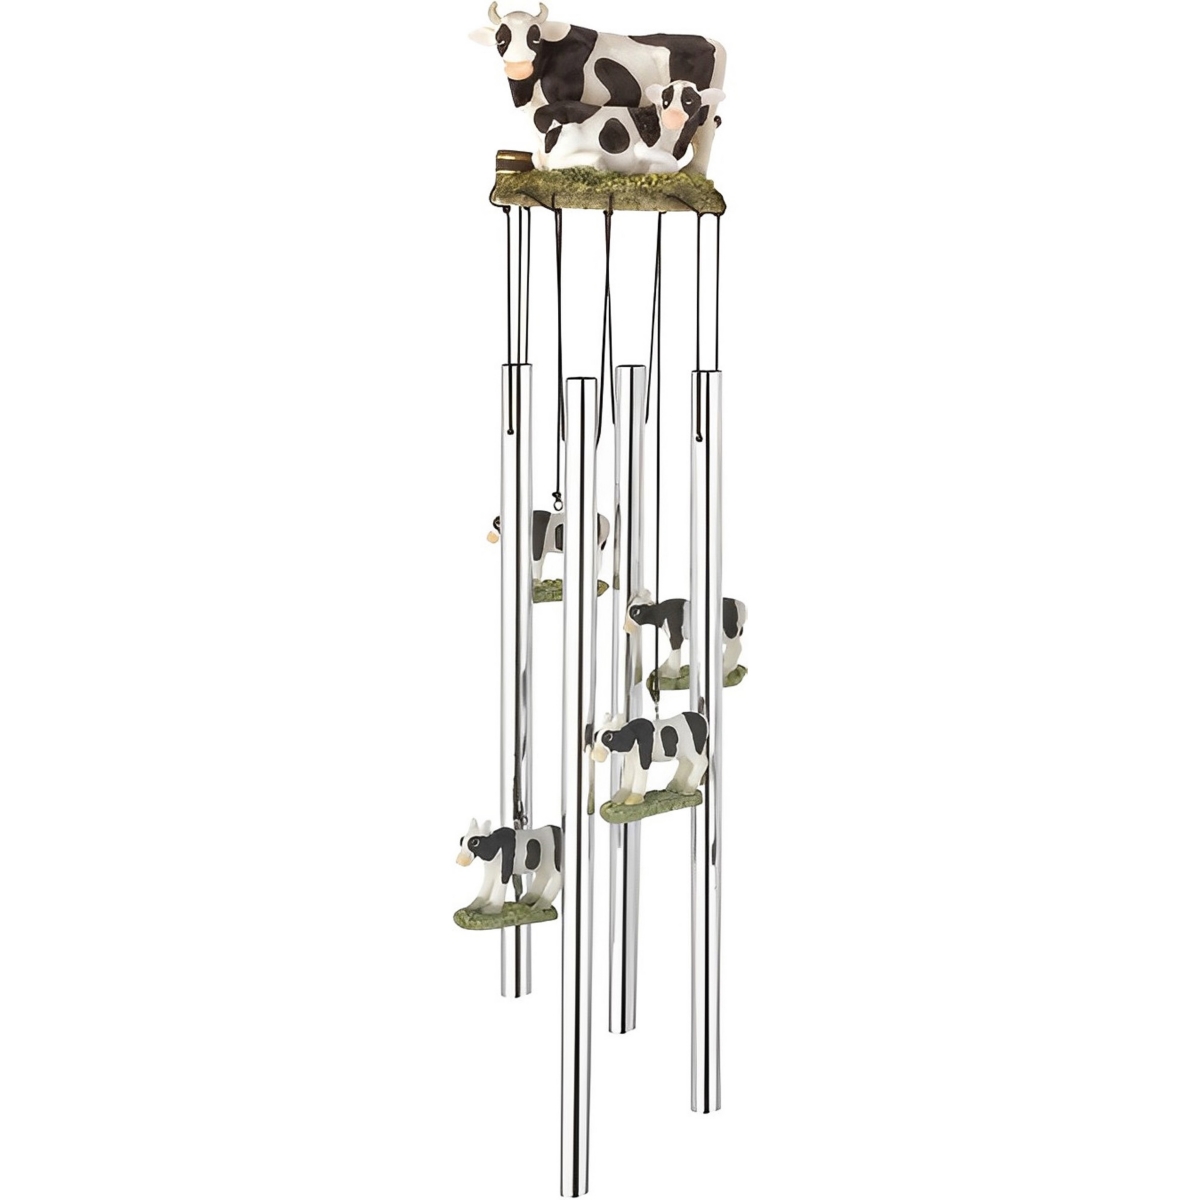 23" Long Round Top Cow Wind Chime Home Decor Perfect Gift for House Warming, Holidays and Birthdays - Silver